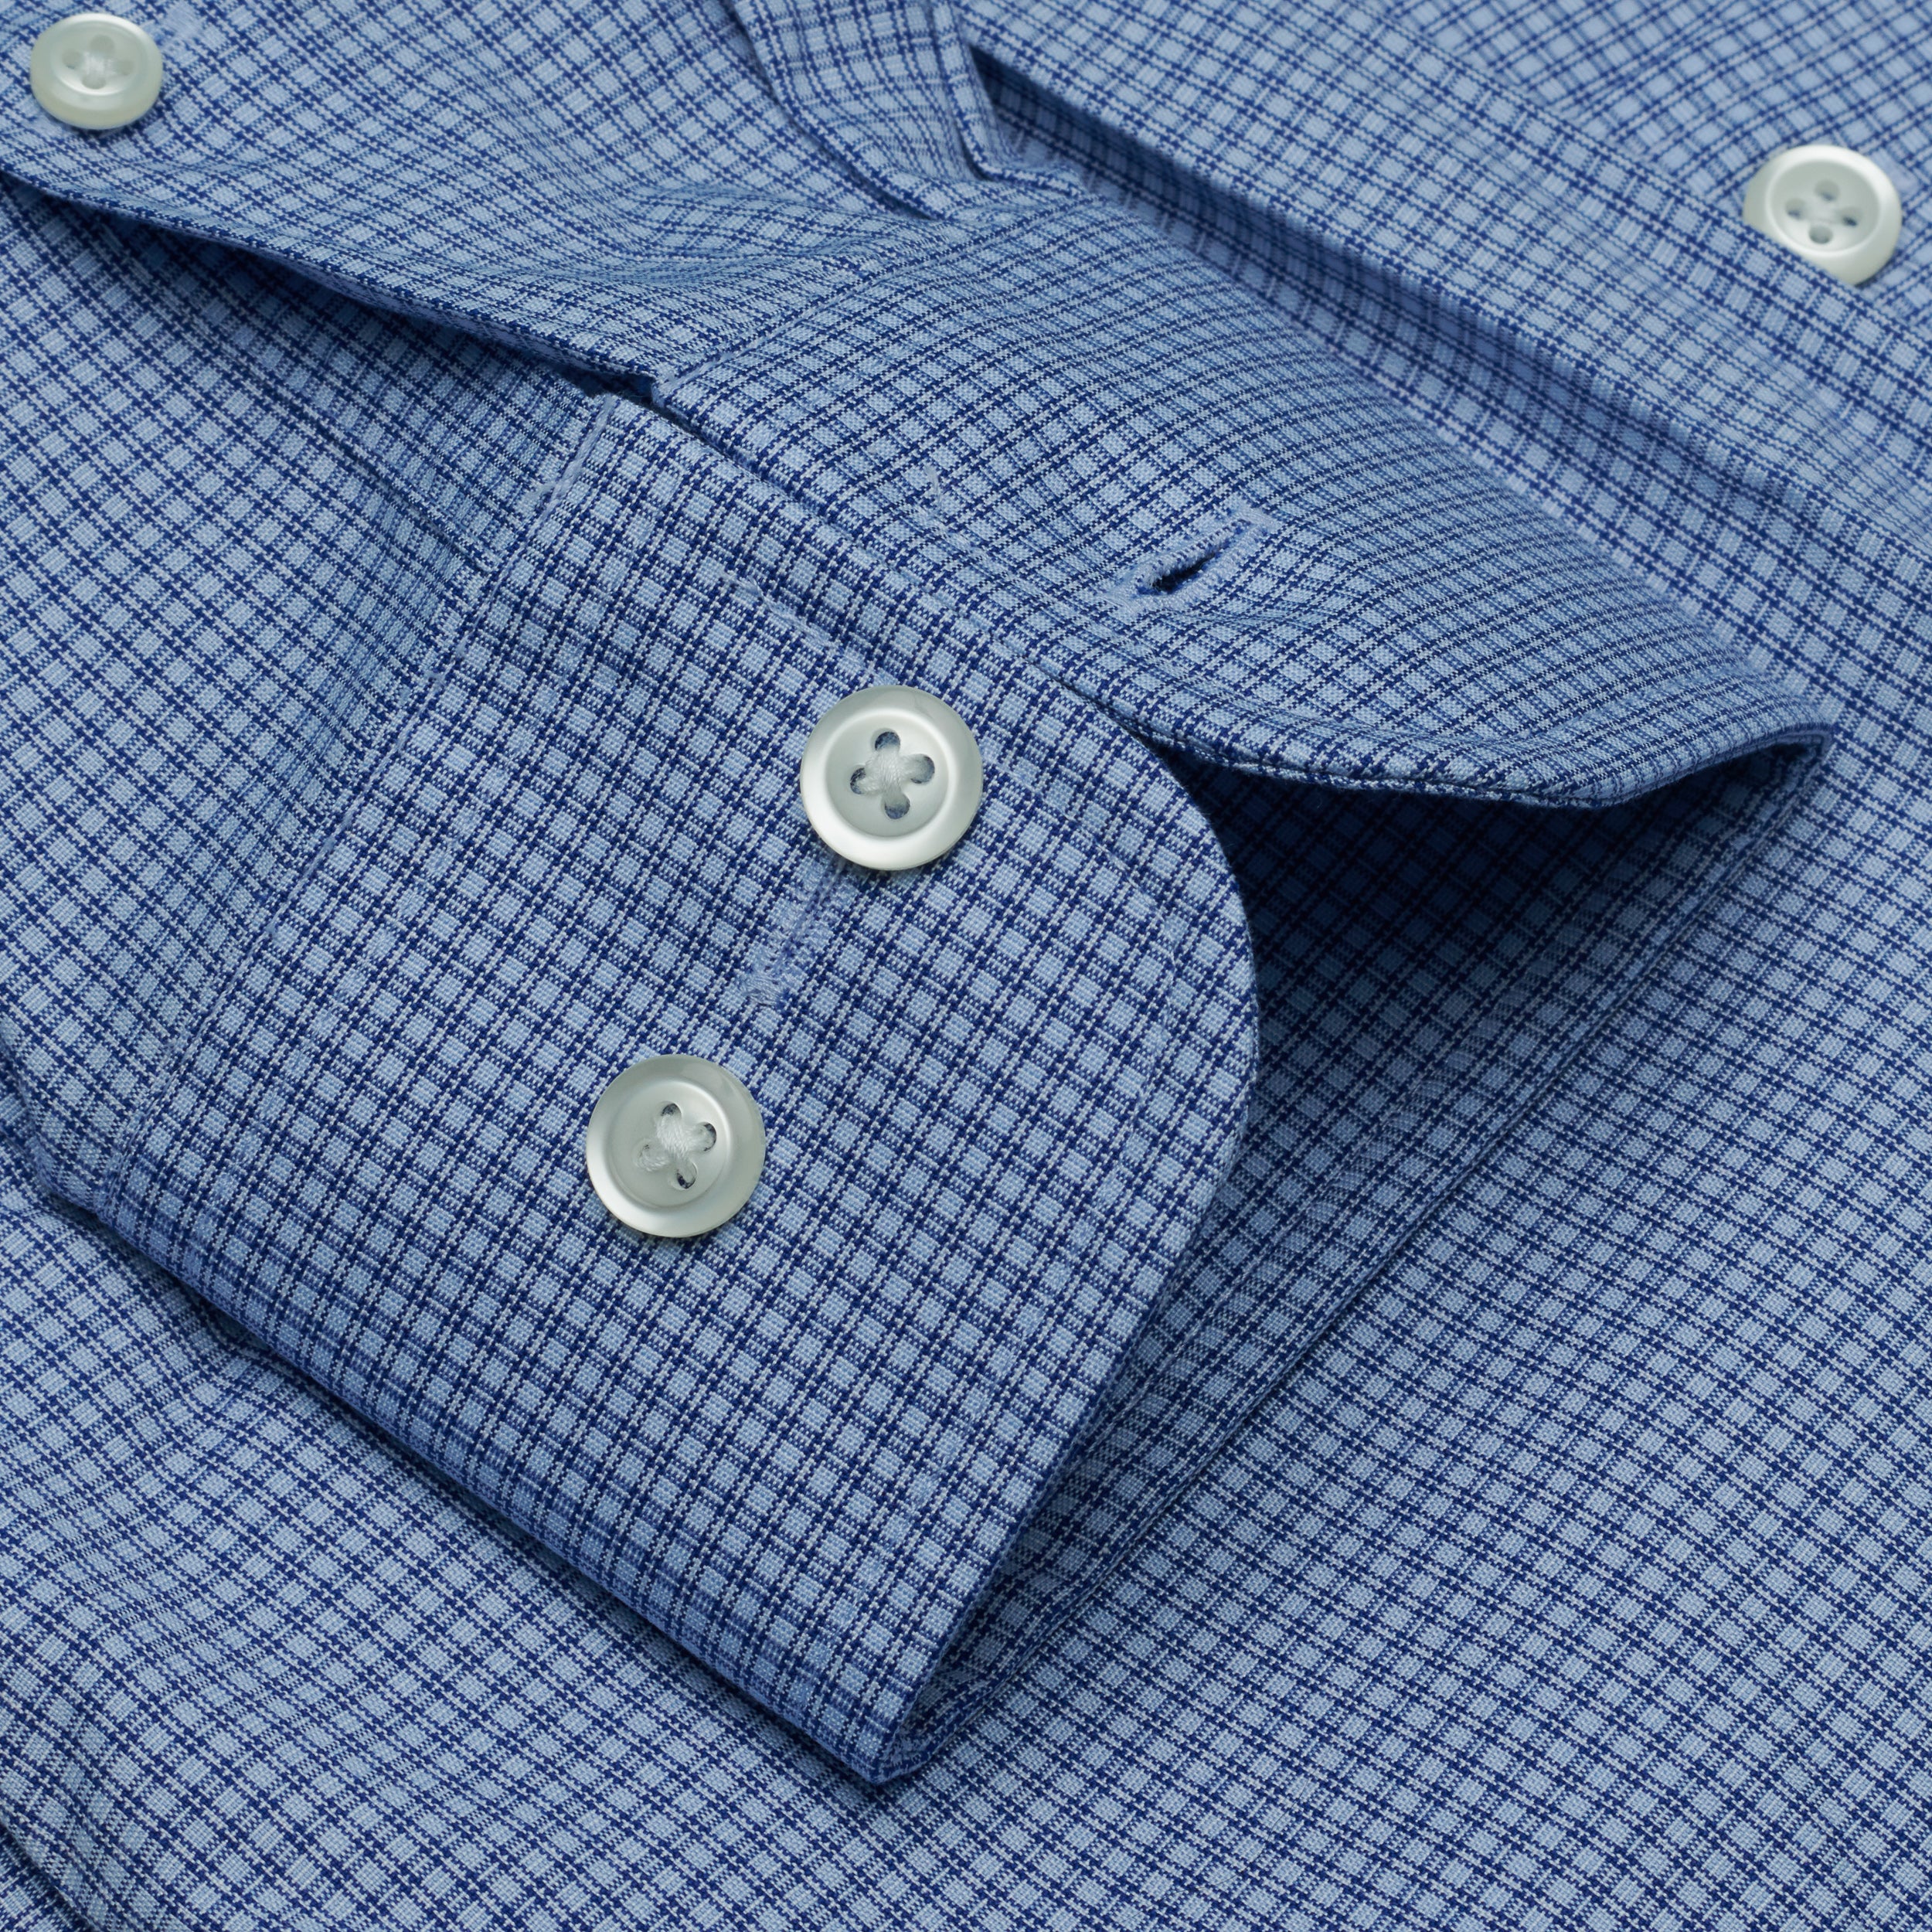 064 TF BD - Blue Double Line Check Tailored Fit Button Down Collar